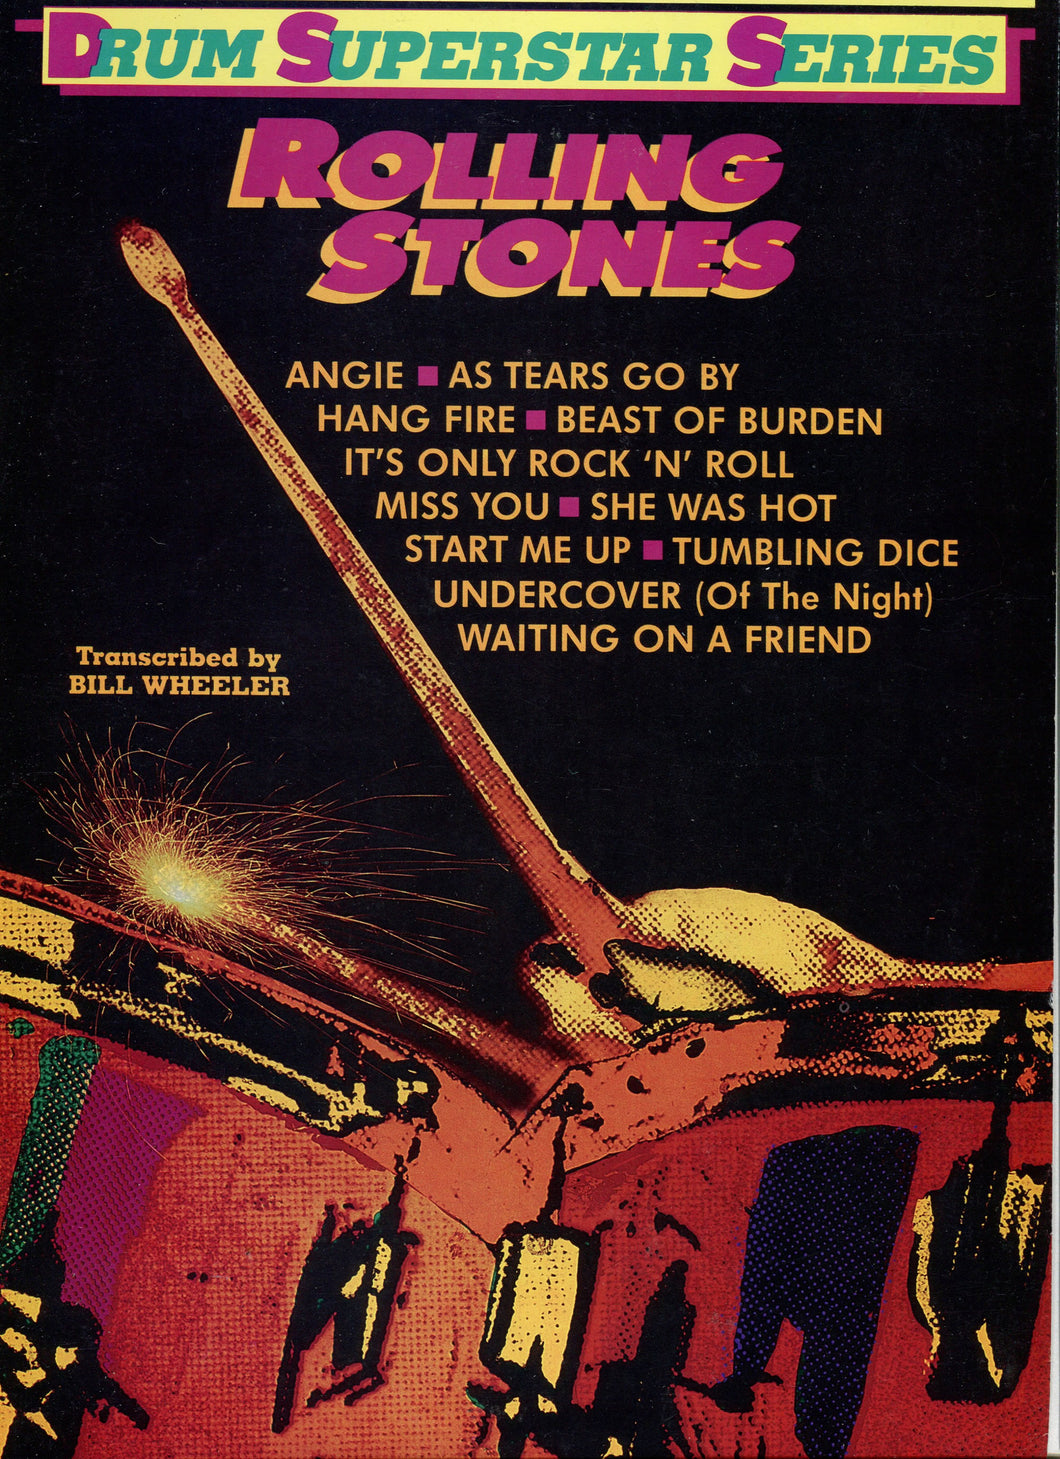 It's Only Rock 'n' Roll - The Rolling Stones - Collection of Drum Transcriptions / Drum Sheet Music - Warner Bros. RSDSS